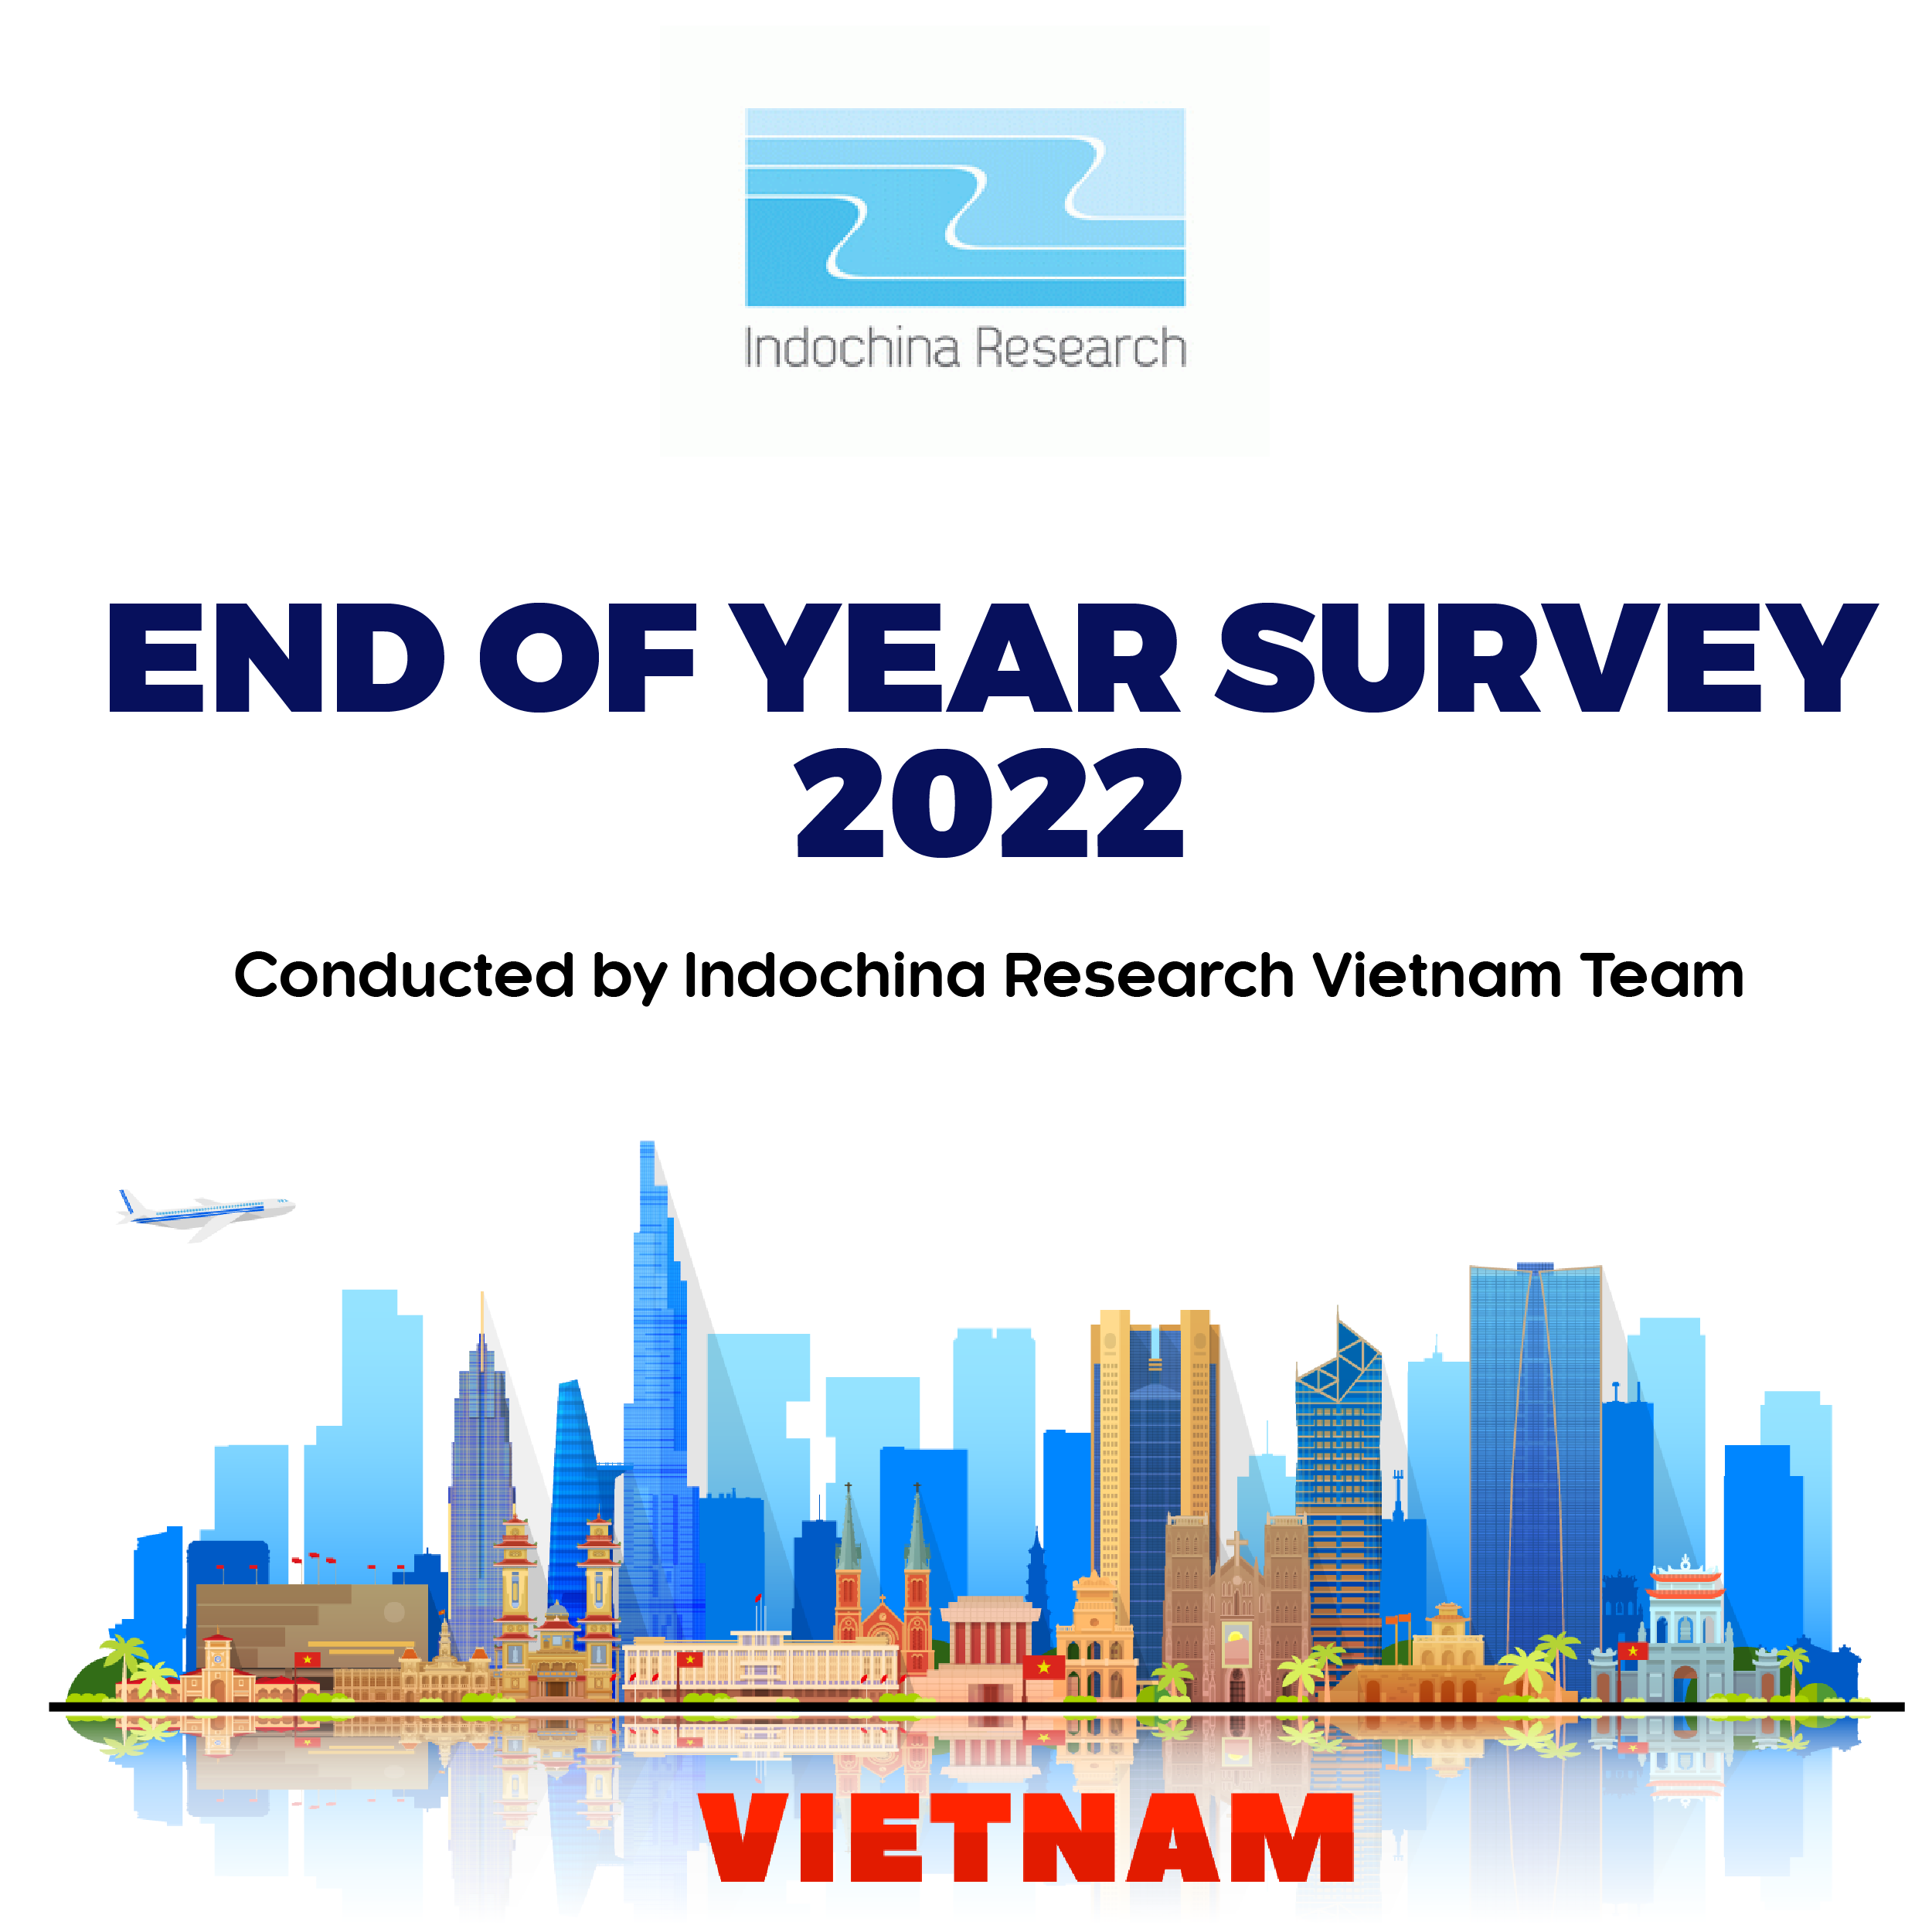 Introduction of End Of Year Survey